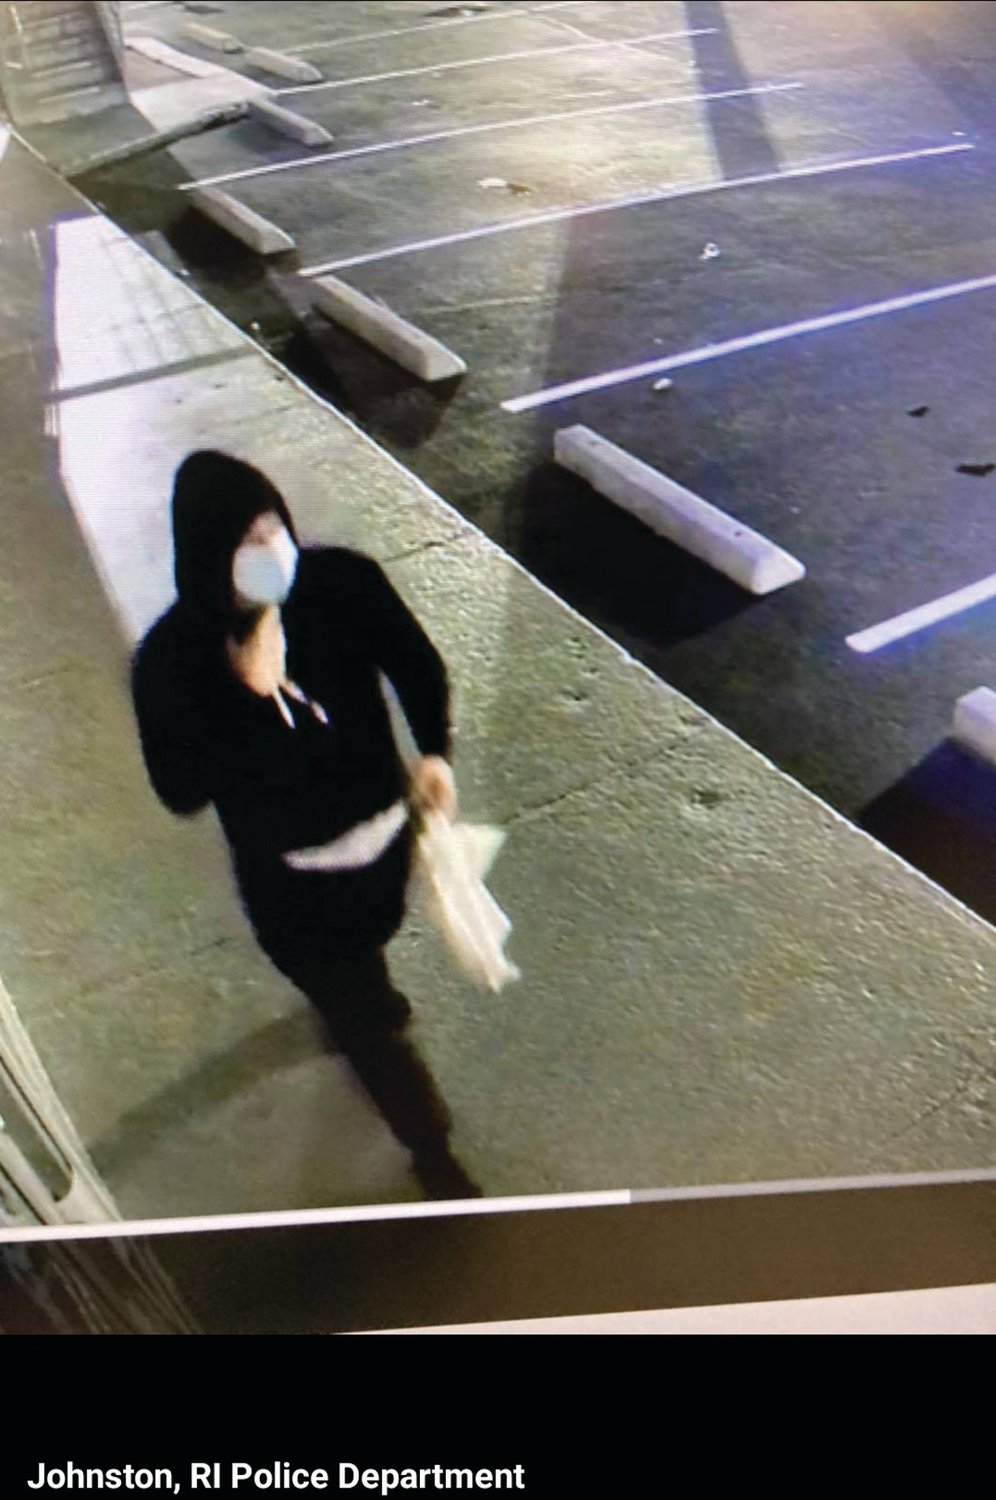 Police have acquired video footage of a man they believe to be the suspect responsible for the burglary. The suspect appears to be a man wearing a black hoodie, dark colored pants, and a white face mask, and likely fled the scene in a newer model Nissan Rogue.